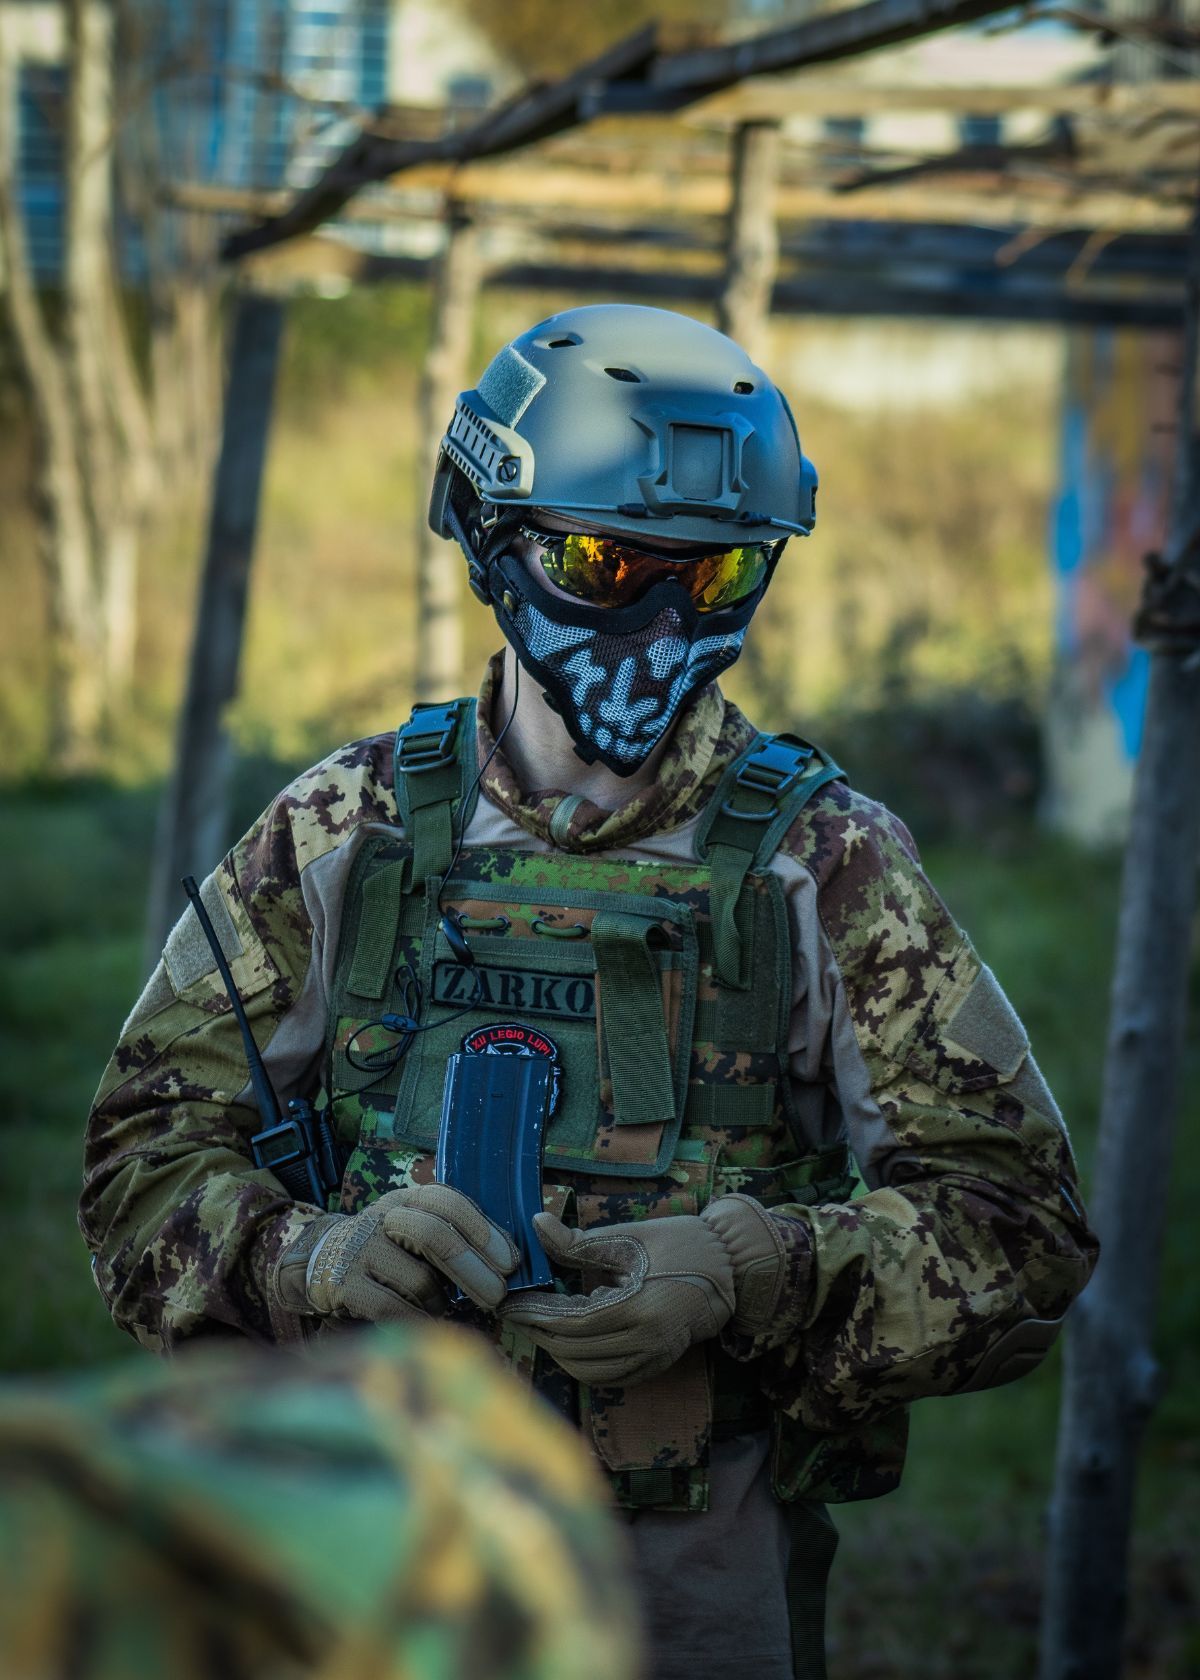 What bluetooth headset fits in a tactical helmet